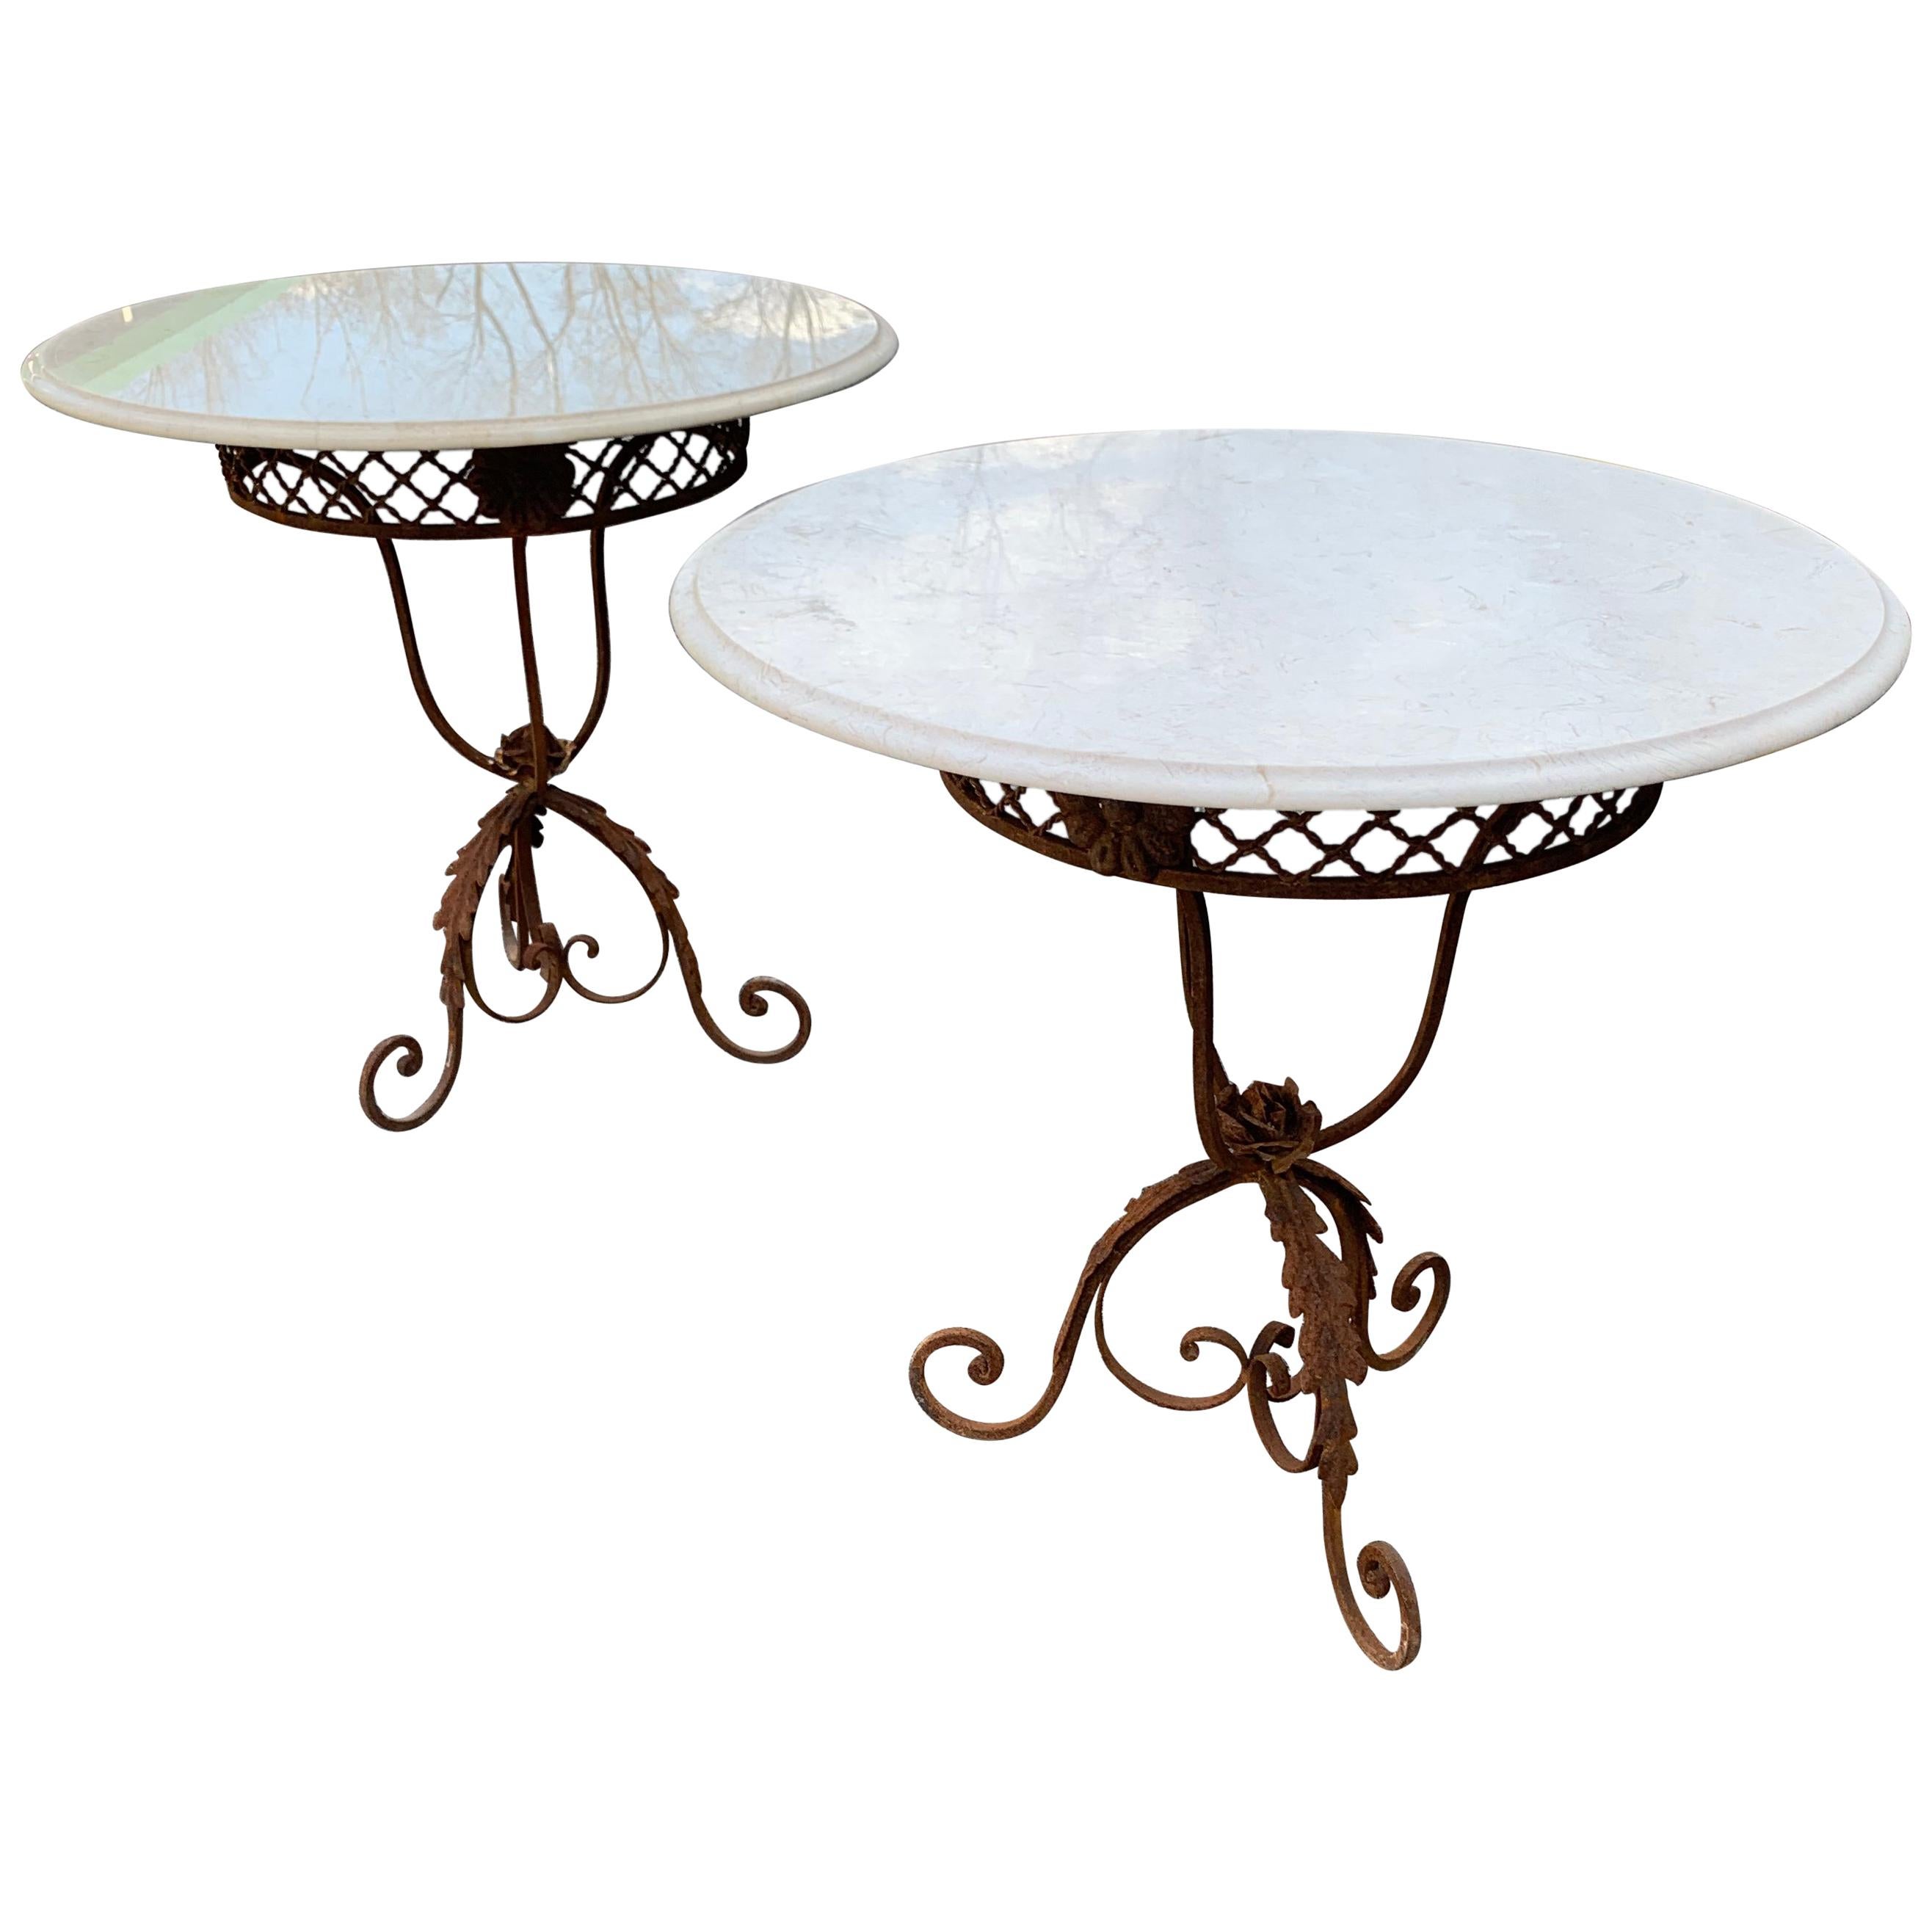 Pair of French Round Wrought Iron and Marble Garden Bistro Tables